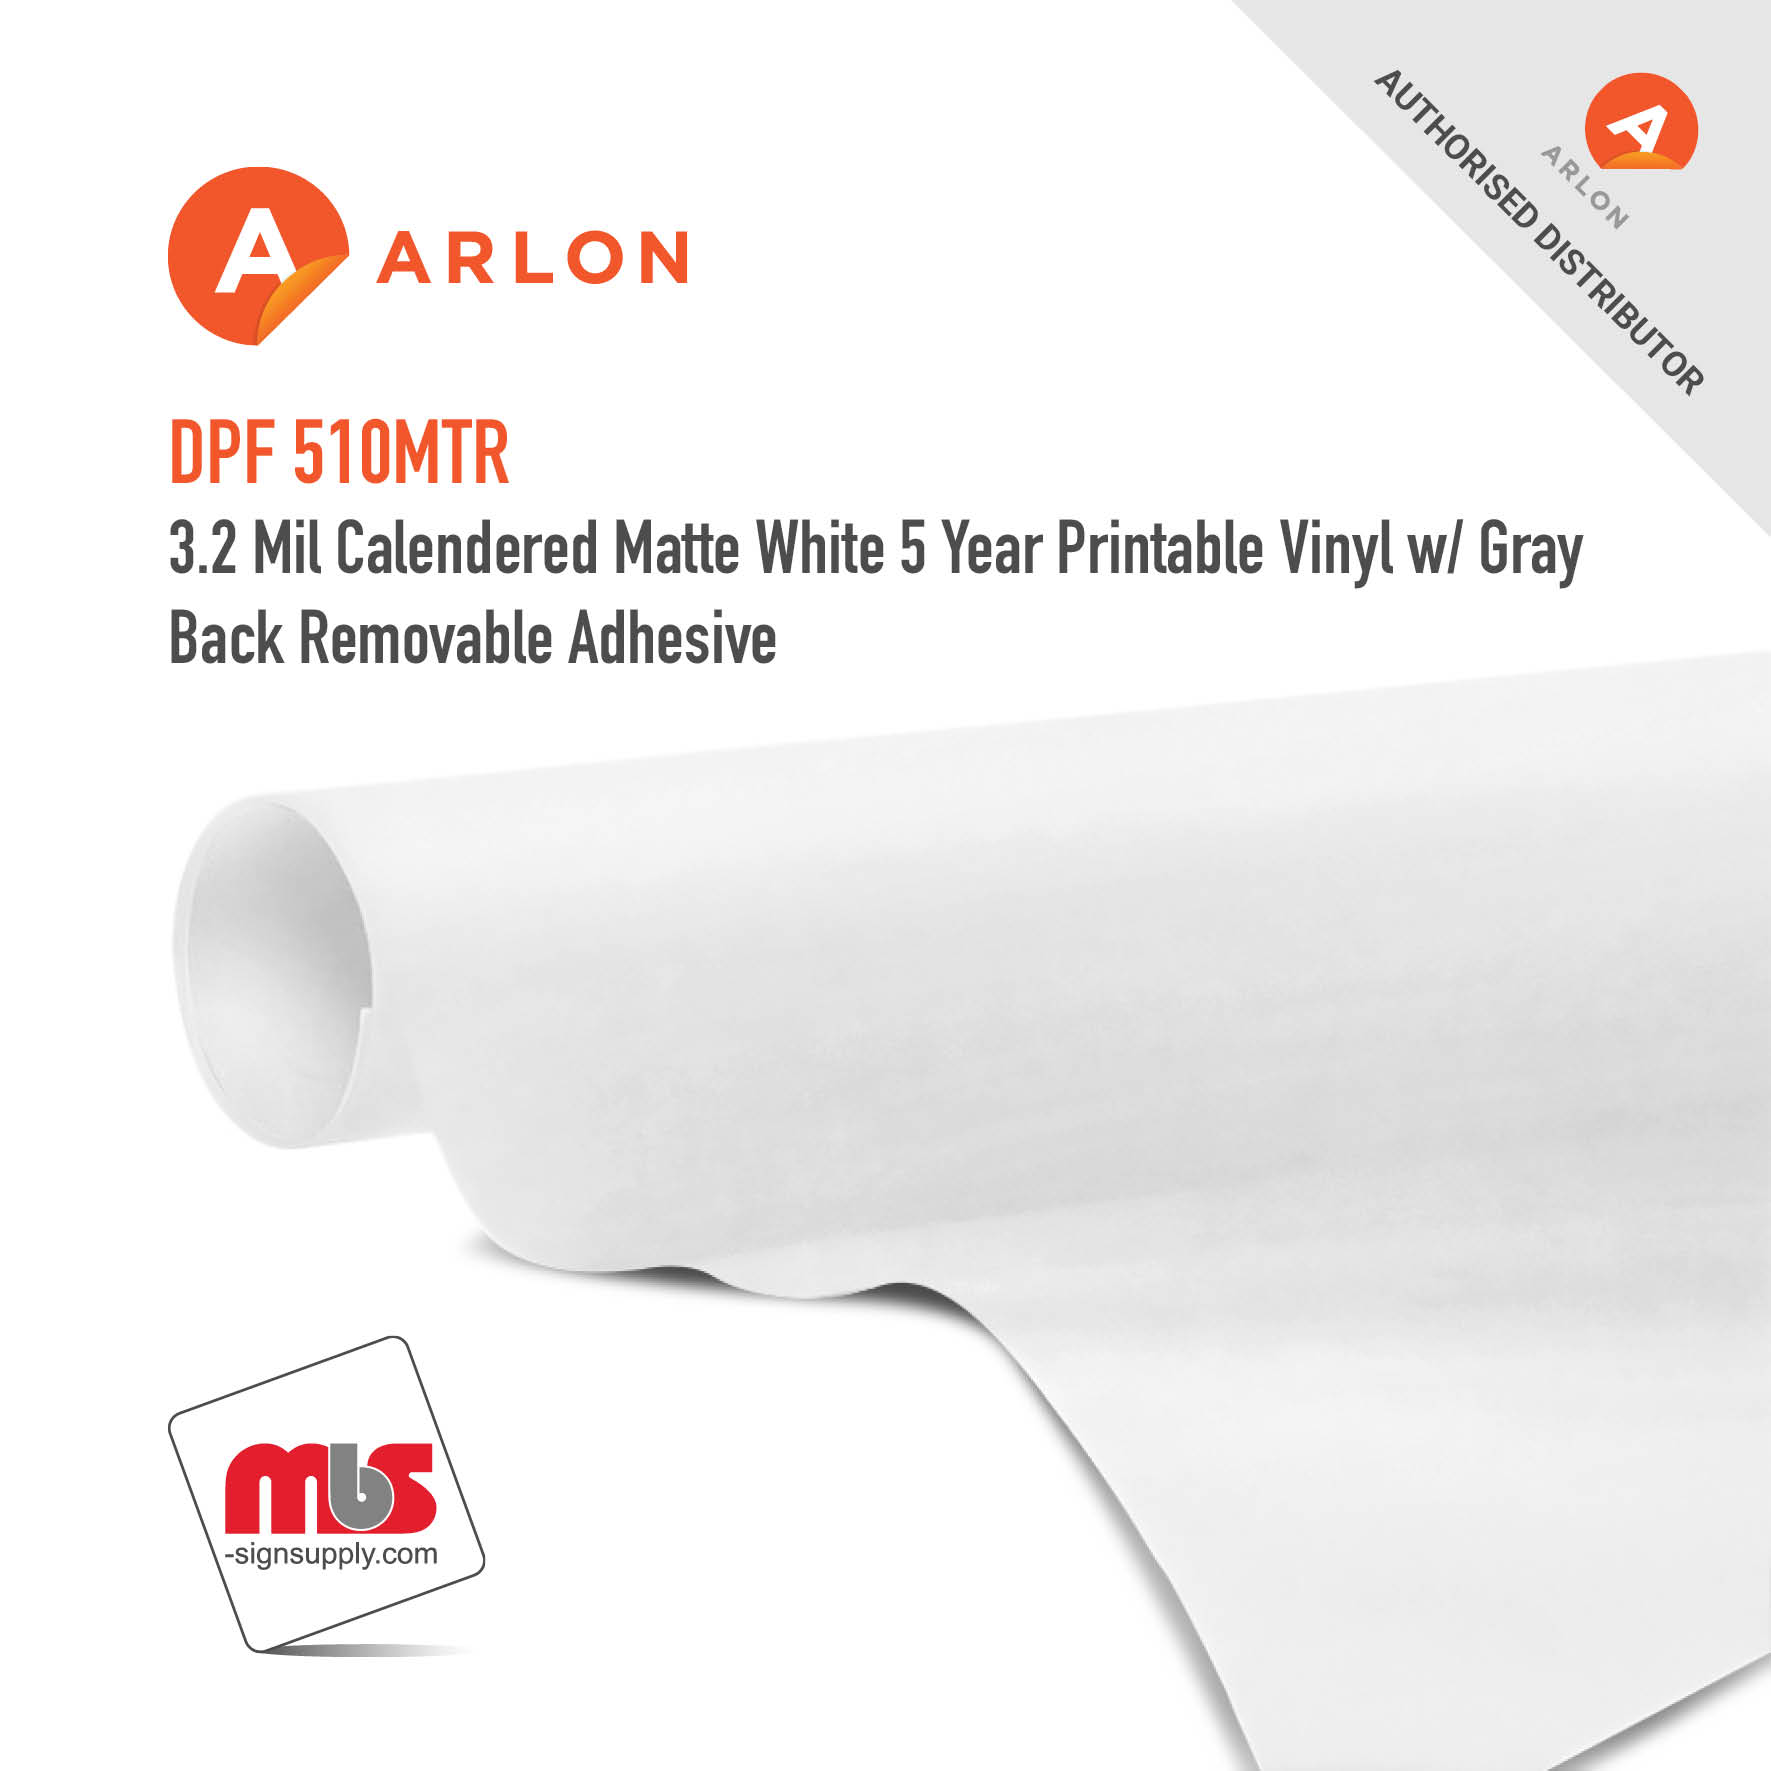 60'' x 50 Yard Roll - Arlon DPF 510MTR 3.2 Mil Calendered Matte White 5 Year Printable Vinyl w/ Gray Back Removable Adhesive